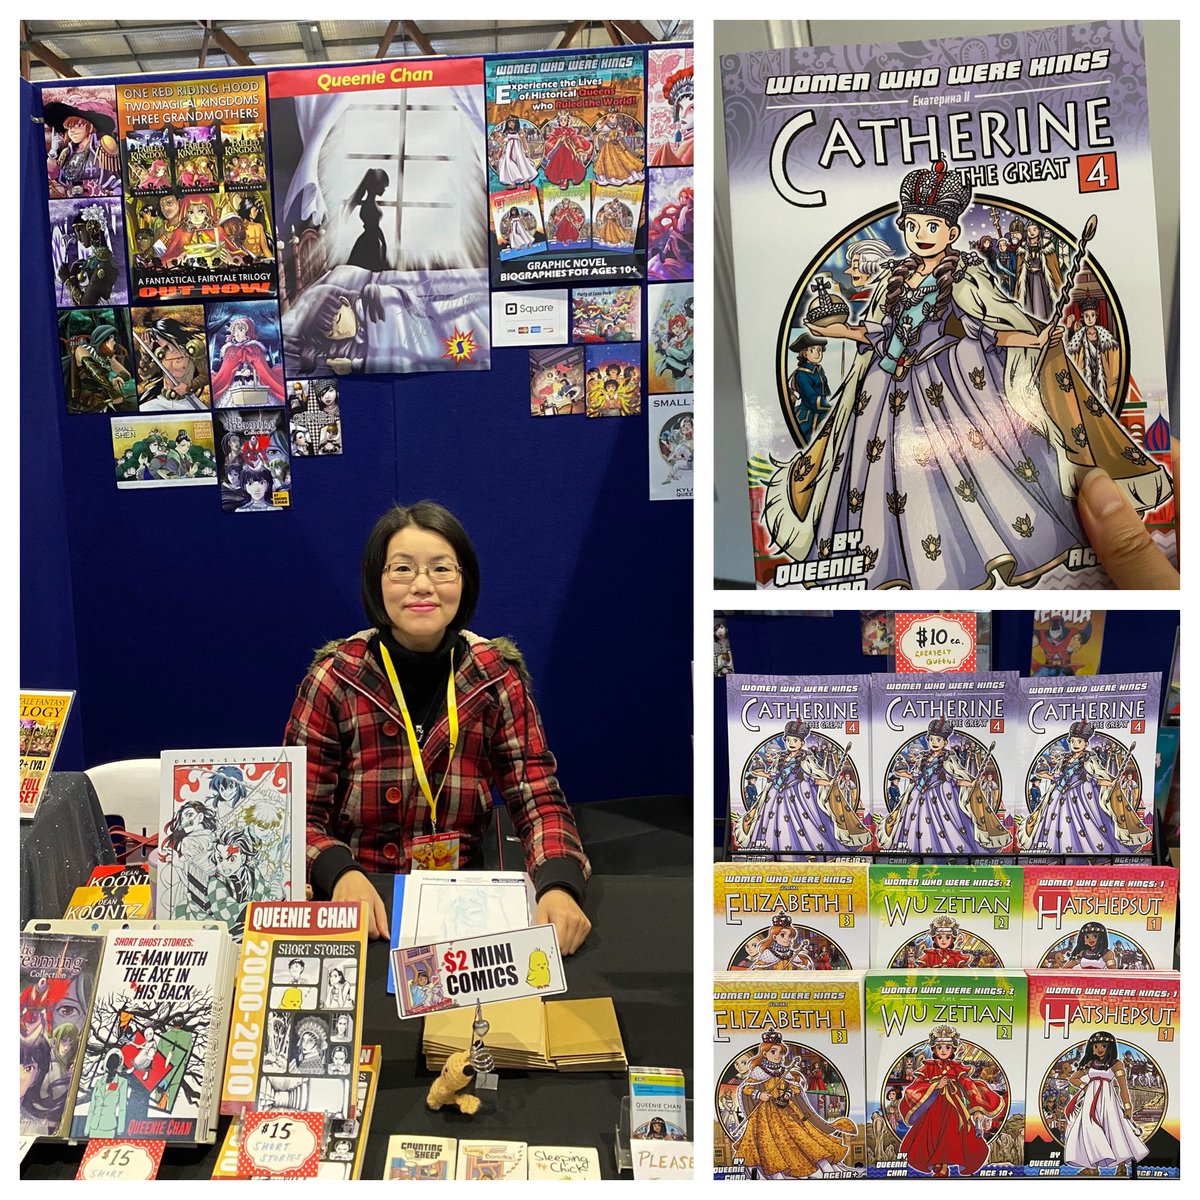 I’m at Sydney @SupanovaExpo table 20, and it’s getting busy! My latest historical queens  #graphicnovel ‘Catherine the Great’ (v4) is out in the ‘Women Who Were Kings’ series, so drop by and check it out! #feministhistory